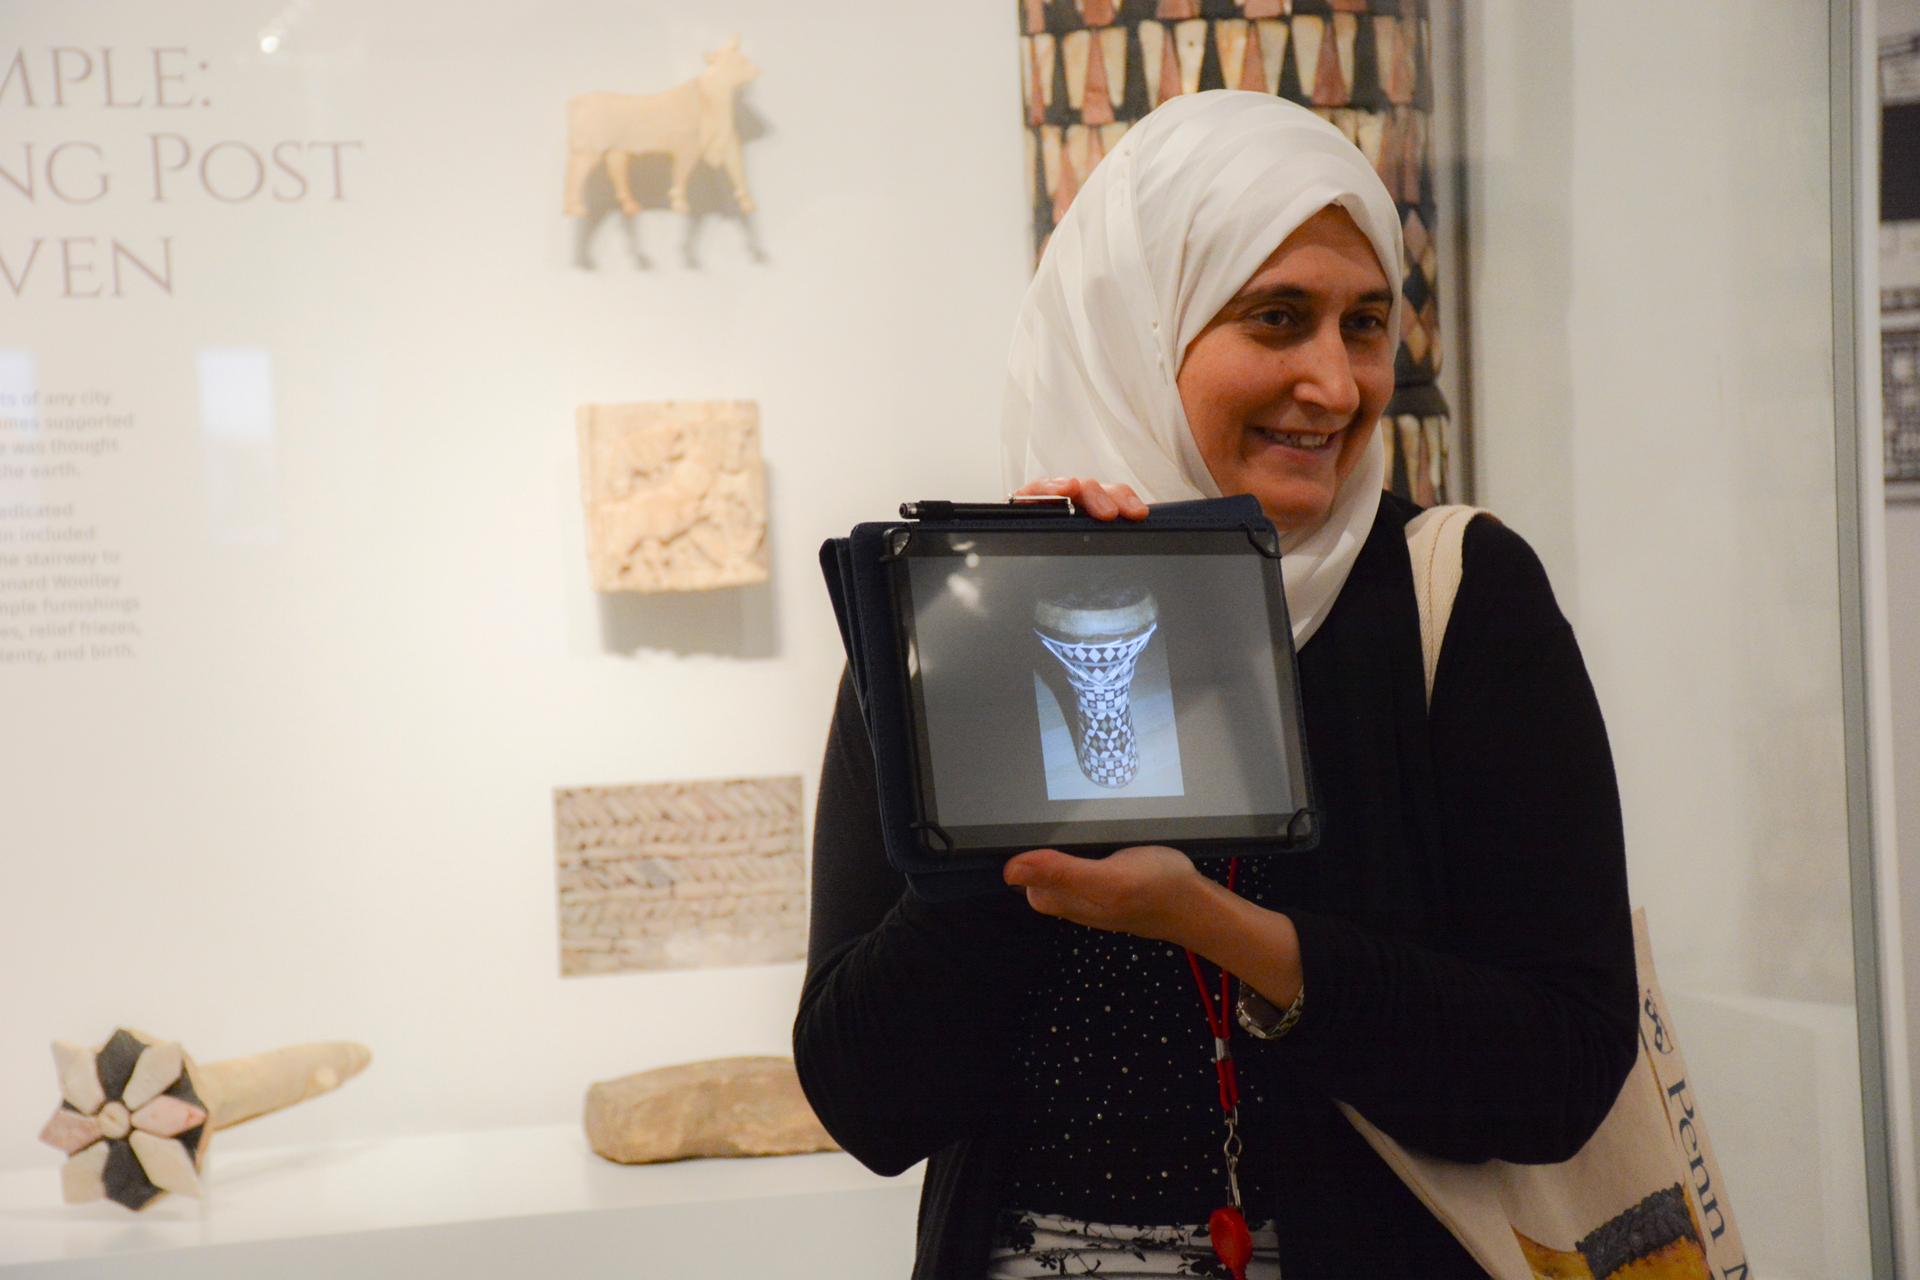 Penn Museum global guide Moumena Saradar came to the US as a Syrian refugee two years ago. 